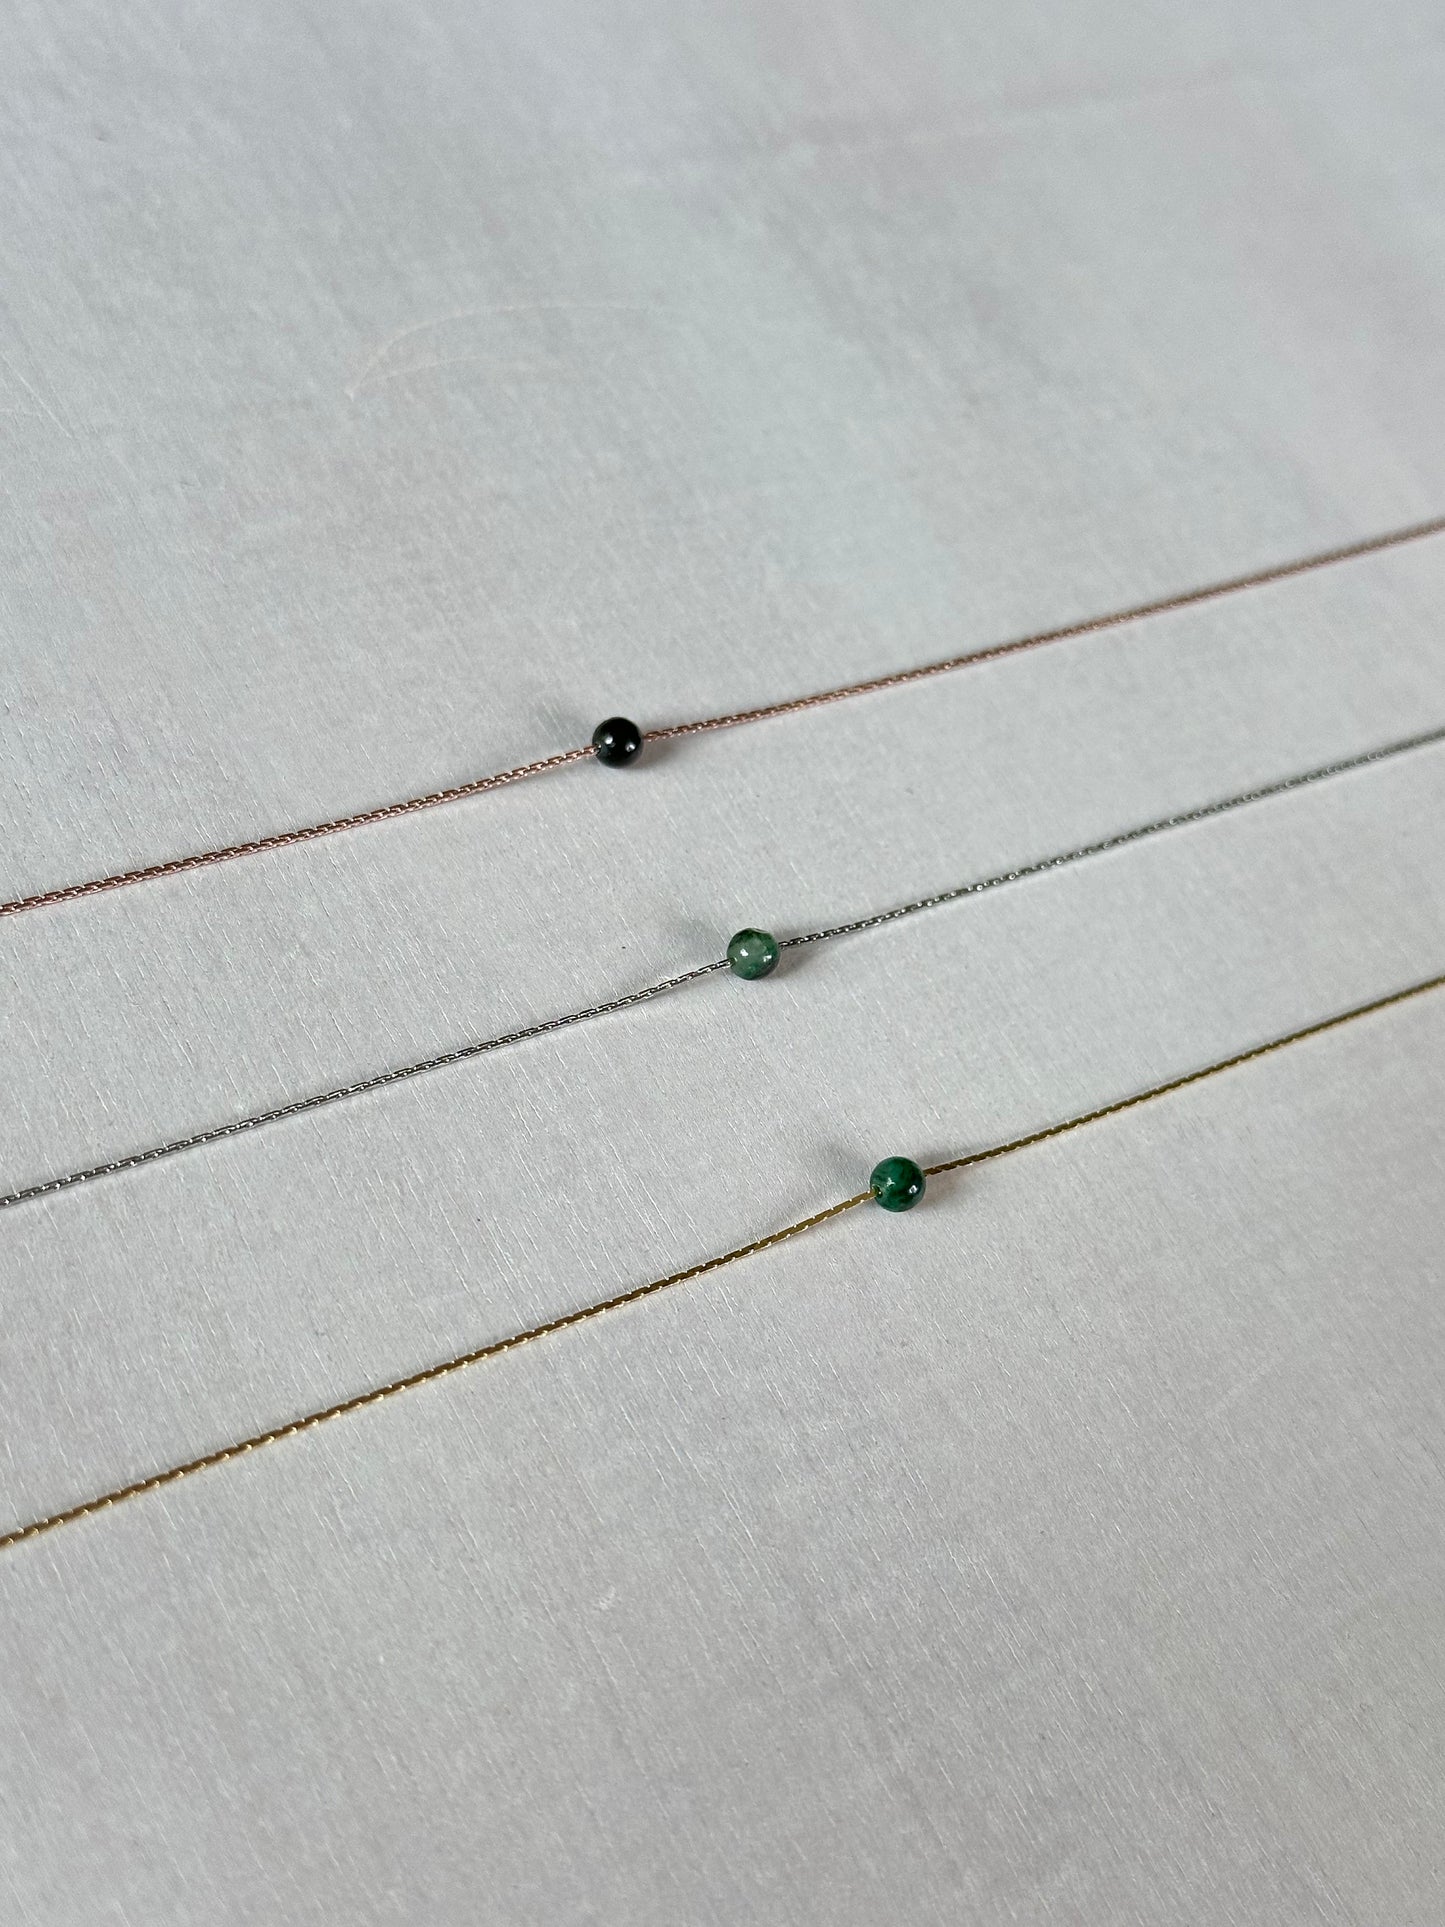 Emerald Necklace | Rose Gold | Gold | Silver | Dainty Necklace | Layering Necklace | Gemstone Necklace | Bead Necklace